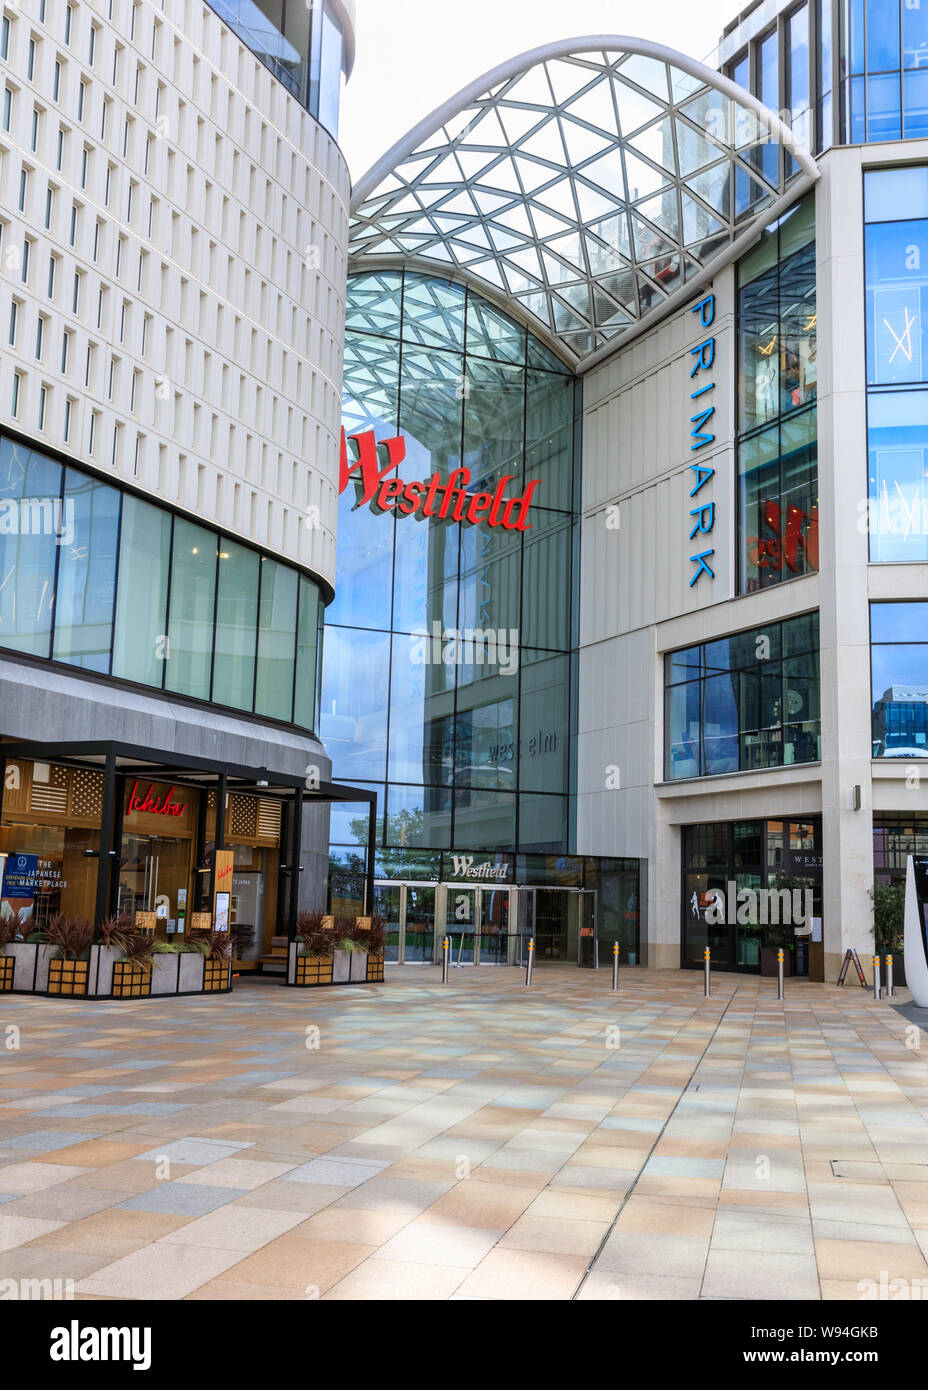 Exteropr view of Westfield Shopping Centre facade and entrance with logo and sign, White City, West London, UK Stock Photo